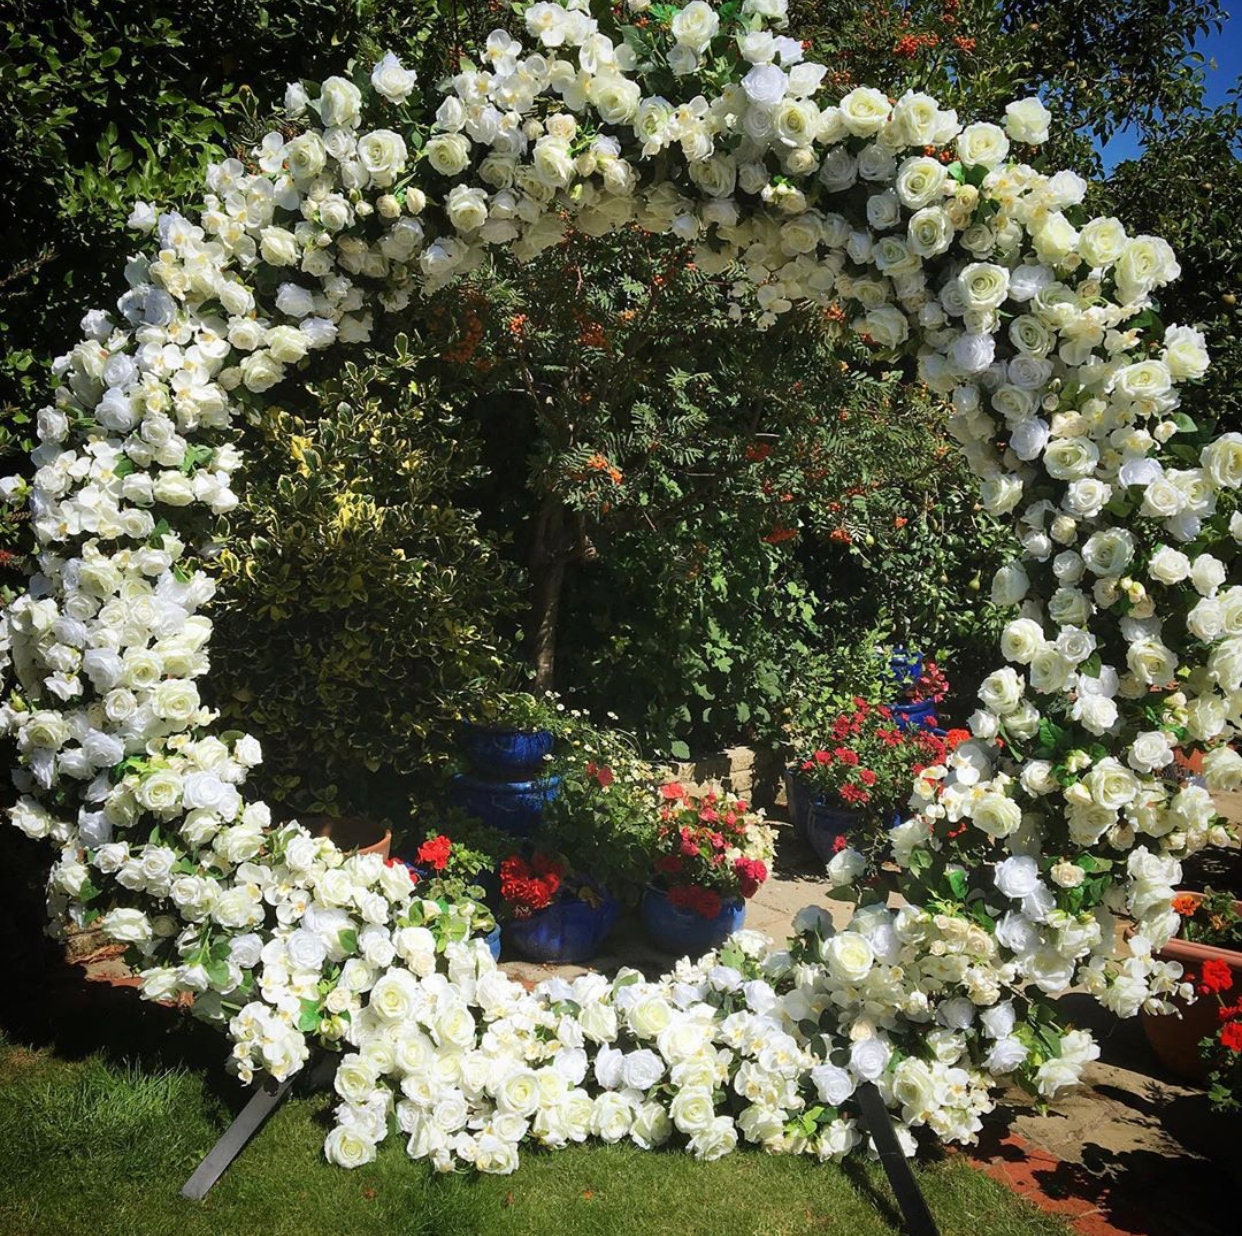 xl Flower Garland, Large Flower Arch Wedding Arch, Moongate, Moongate, Circle Arch